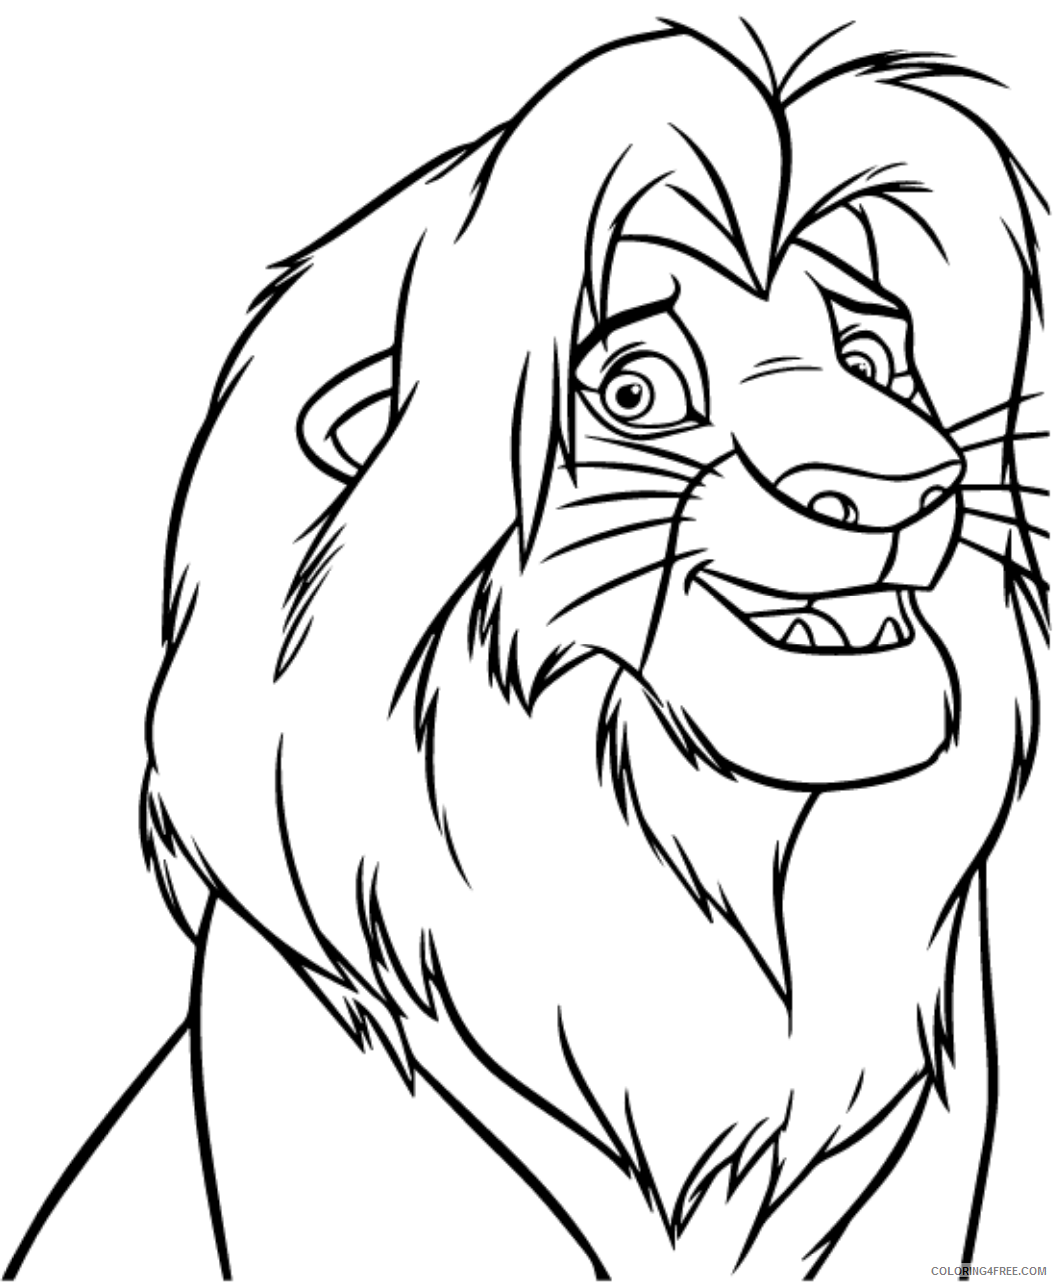 Simba Coloring Pages happy simba Printable 2021 5385 Coloring4free